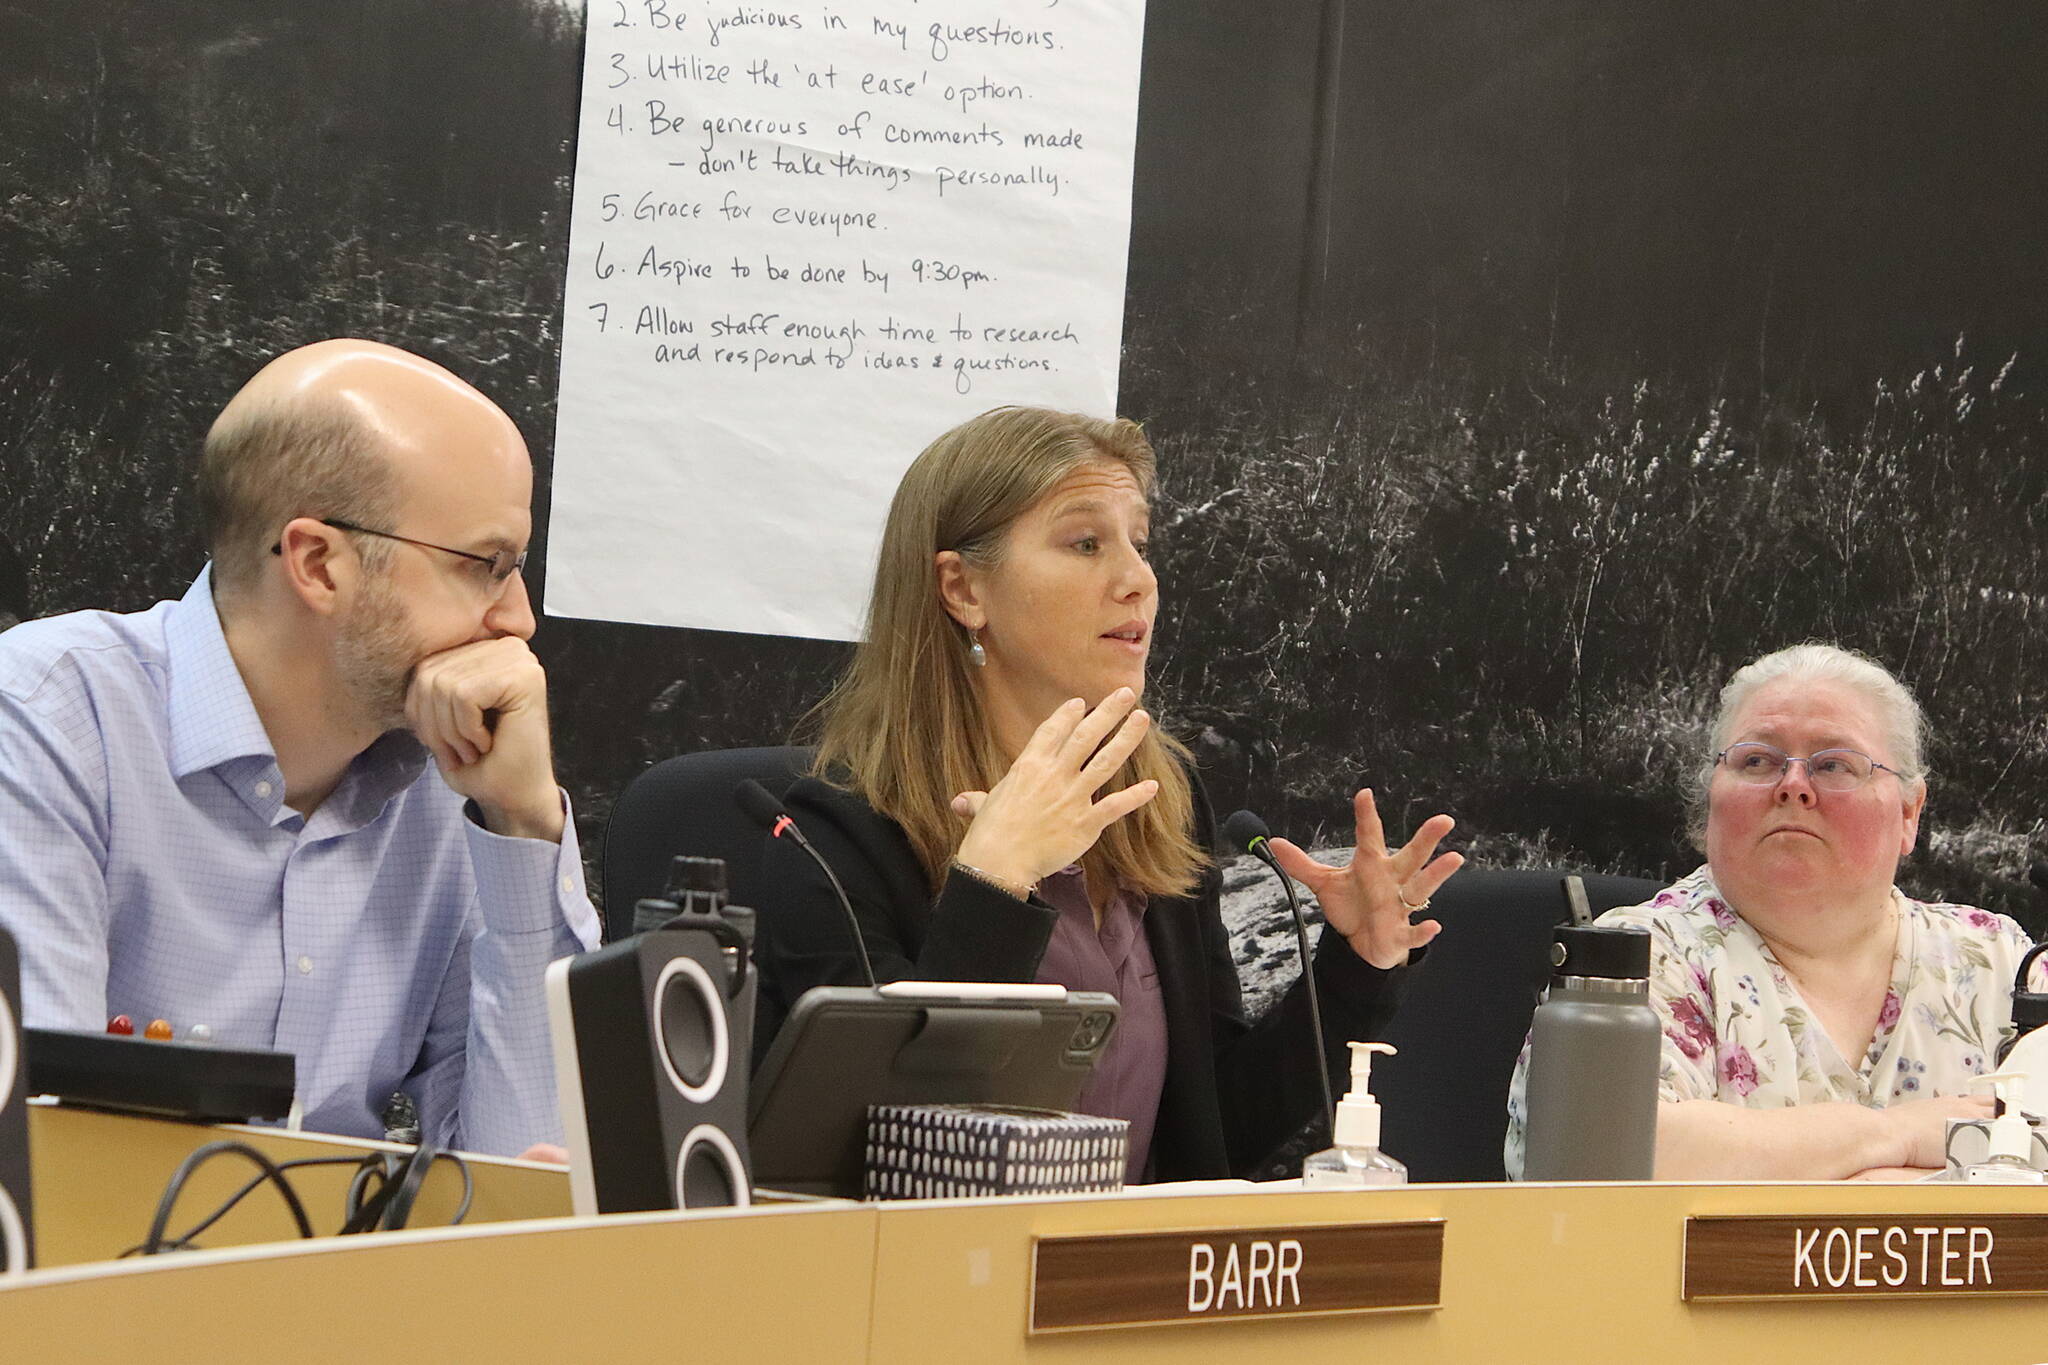 City Manager Katie Koester (center) explains options for a budget item to members of the Juneau Assembly’s Finance Committee during a meeting Wednesday night as Deputy City Manager Robert Barr and Finance Director Angie Flick listen. (Mark Sabbatini / Juneau Empire)